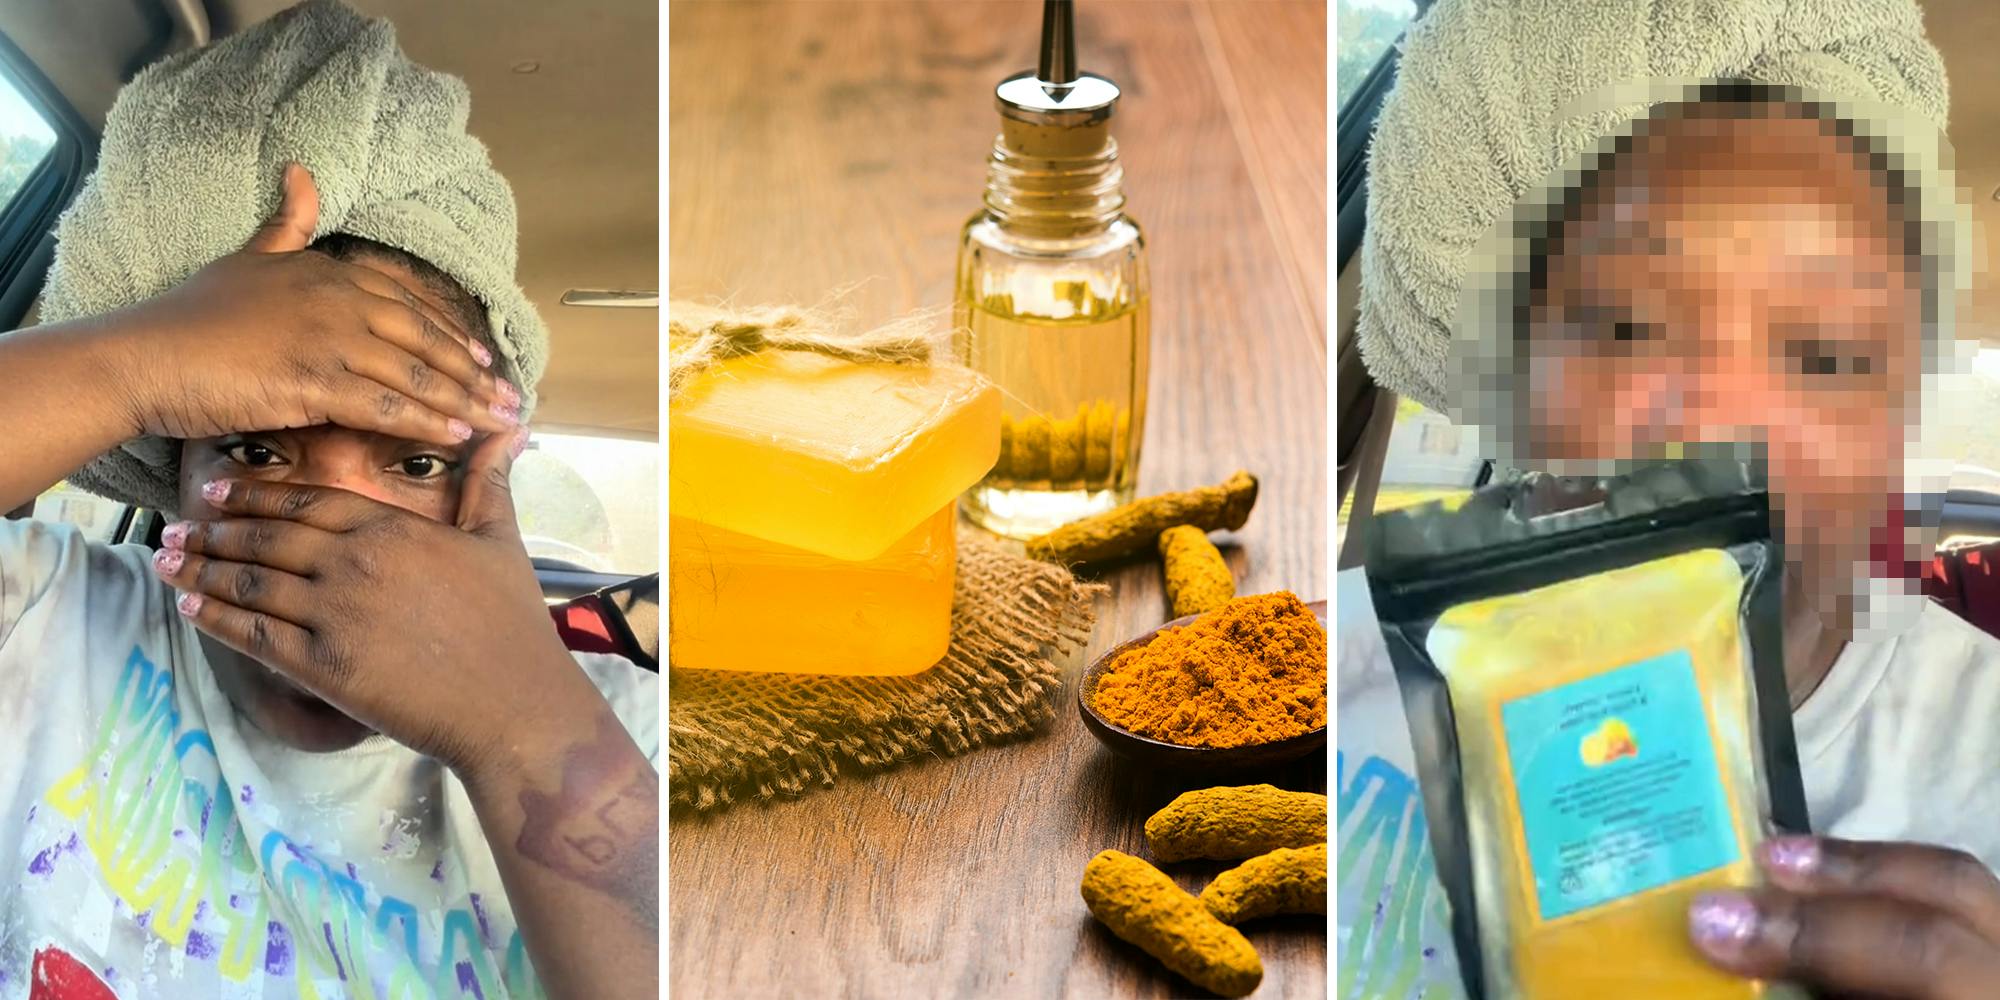 ‘My heart dropped’: Woman shares warning on viral turmeric soap after it ‘burned’ her face